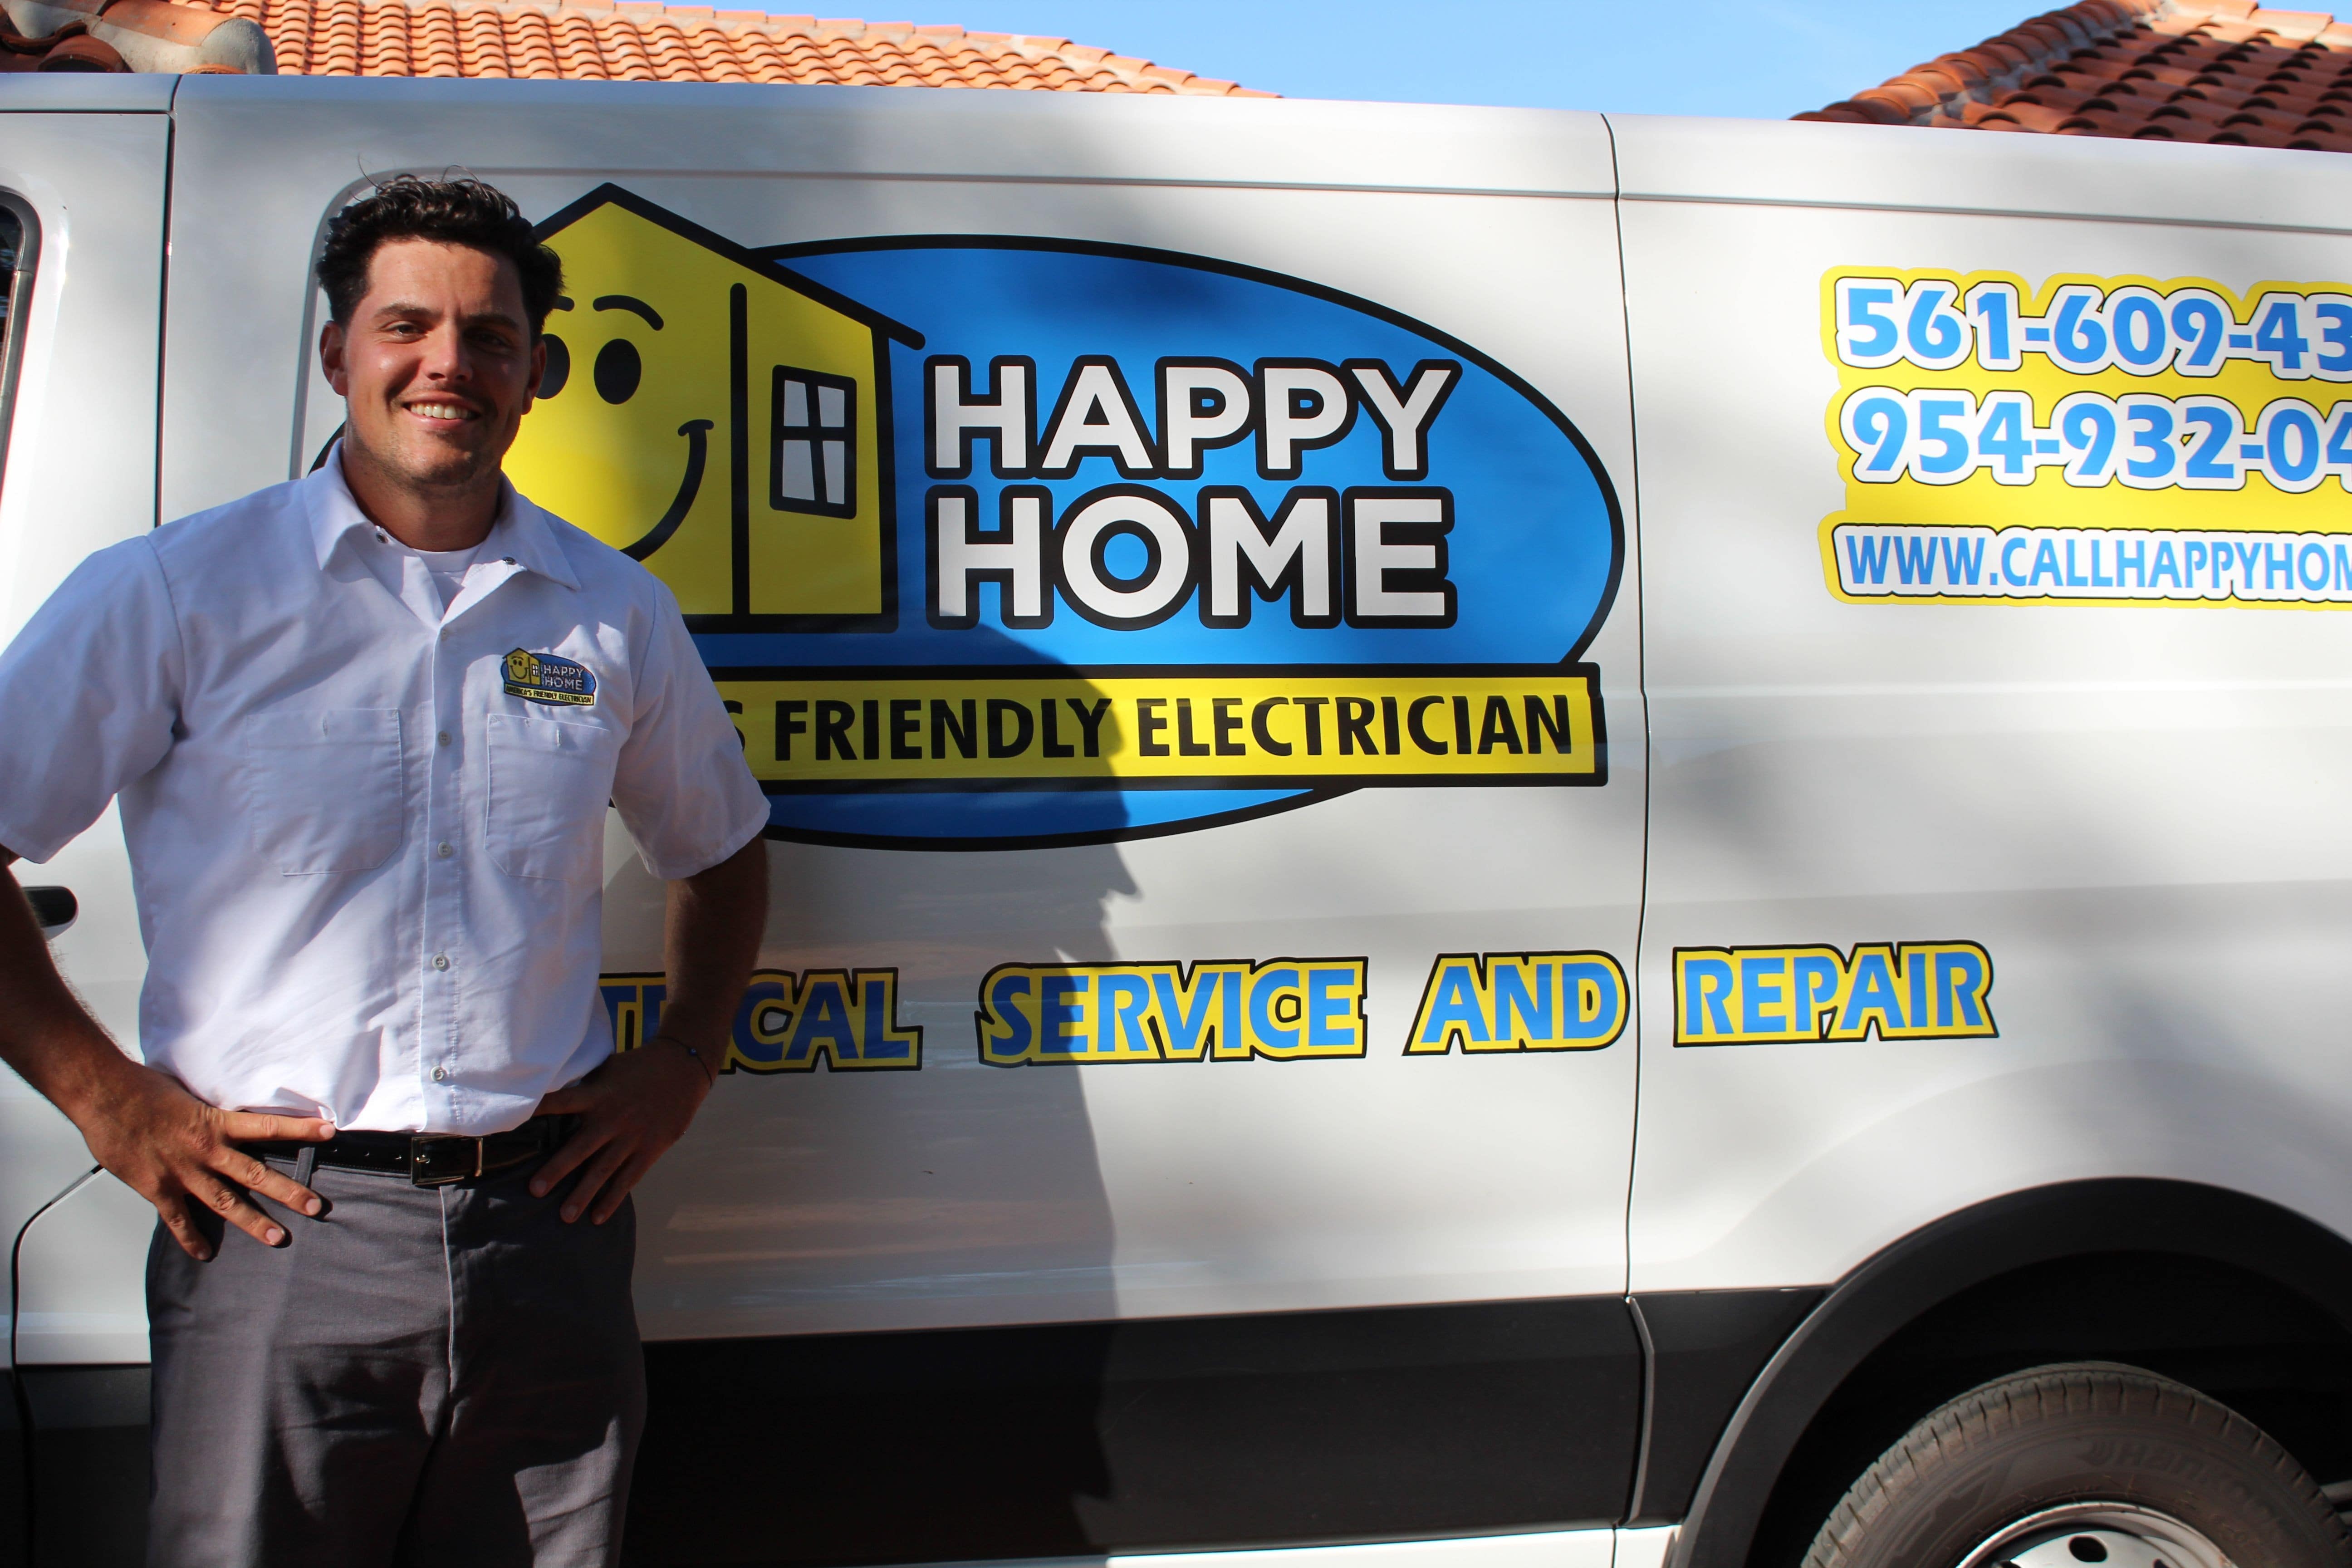 Happy Home Emergency Electricians Florida,Emergency Electric Repairs,Local